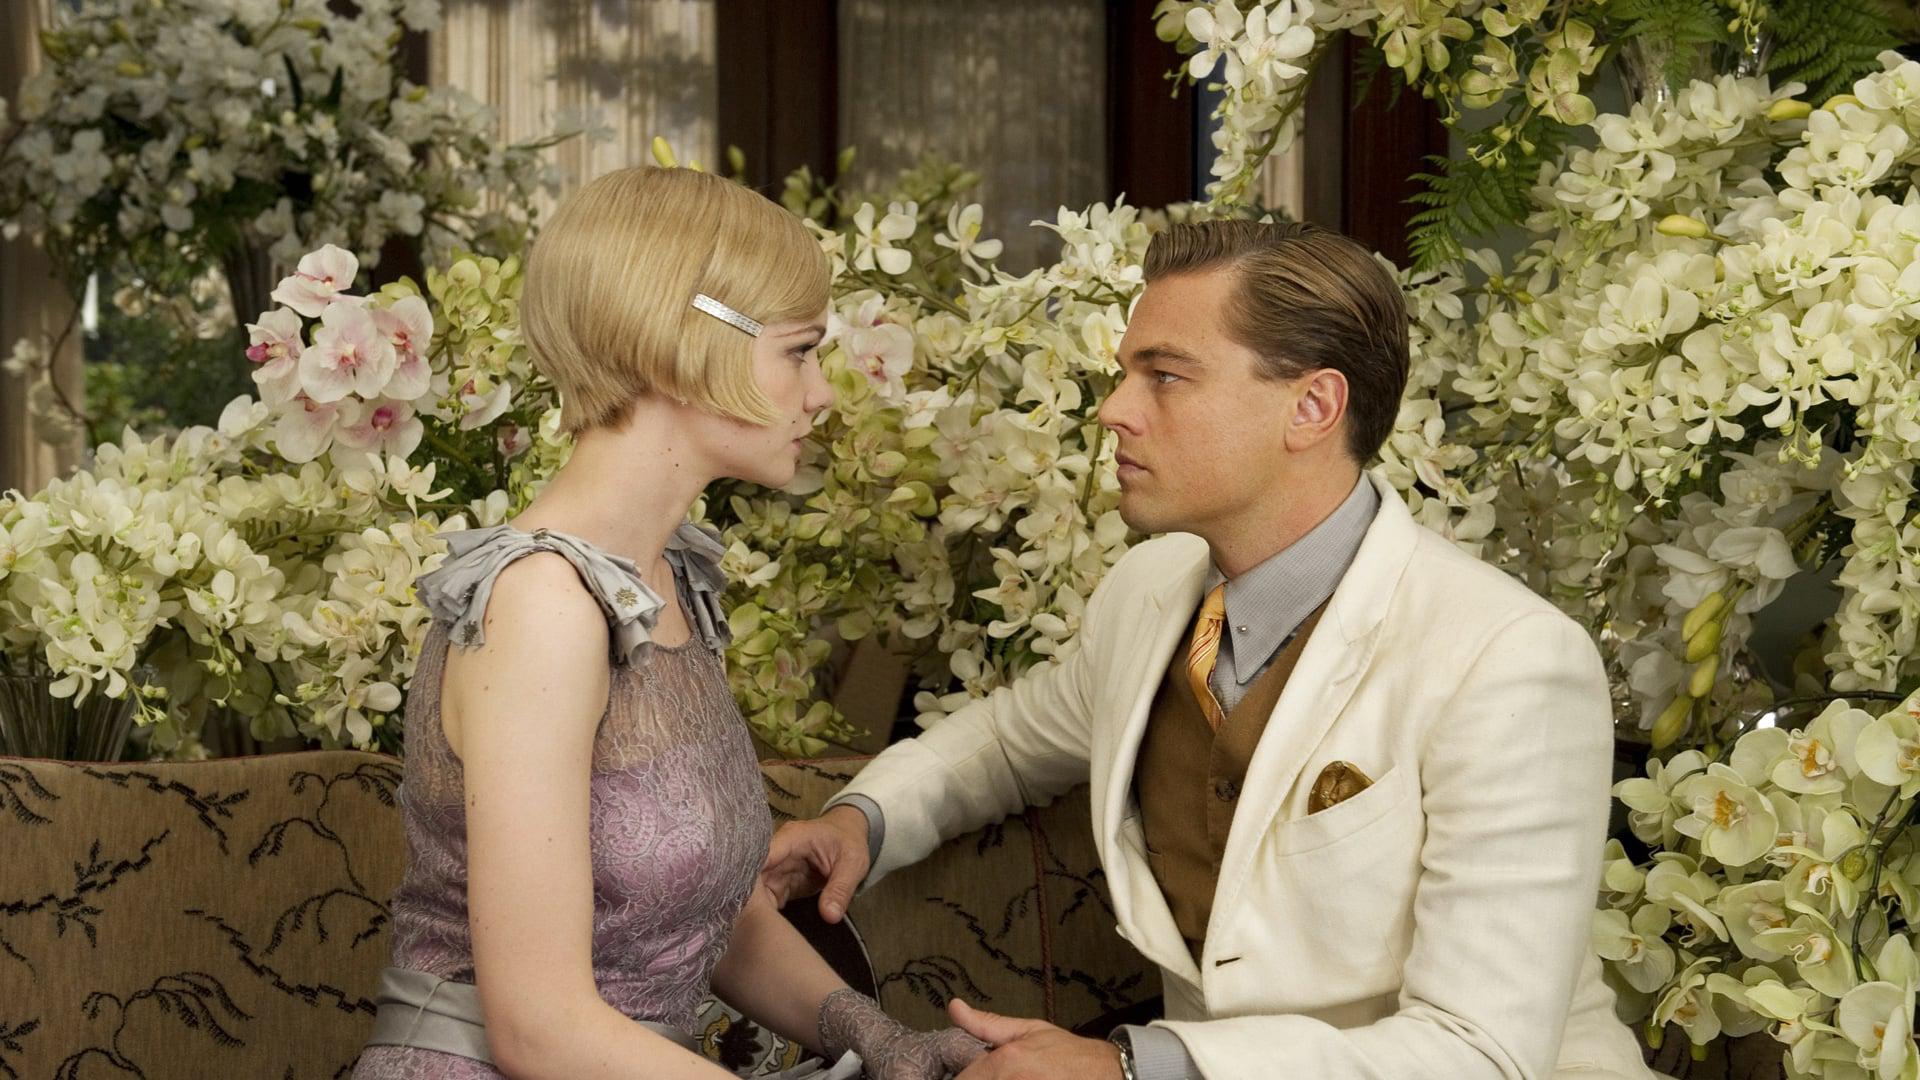 Backdrop Image for The Great Gatsby